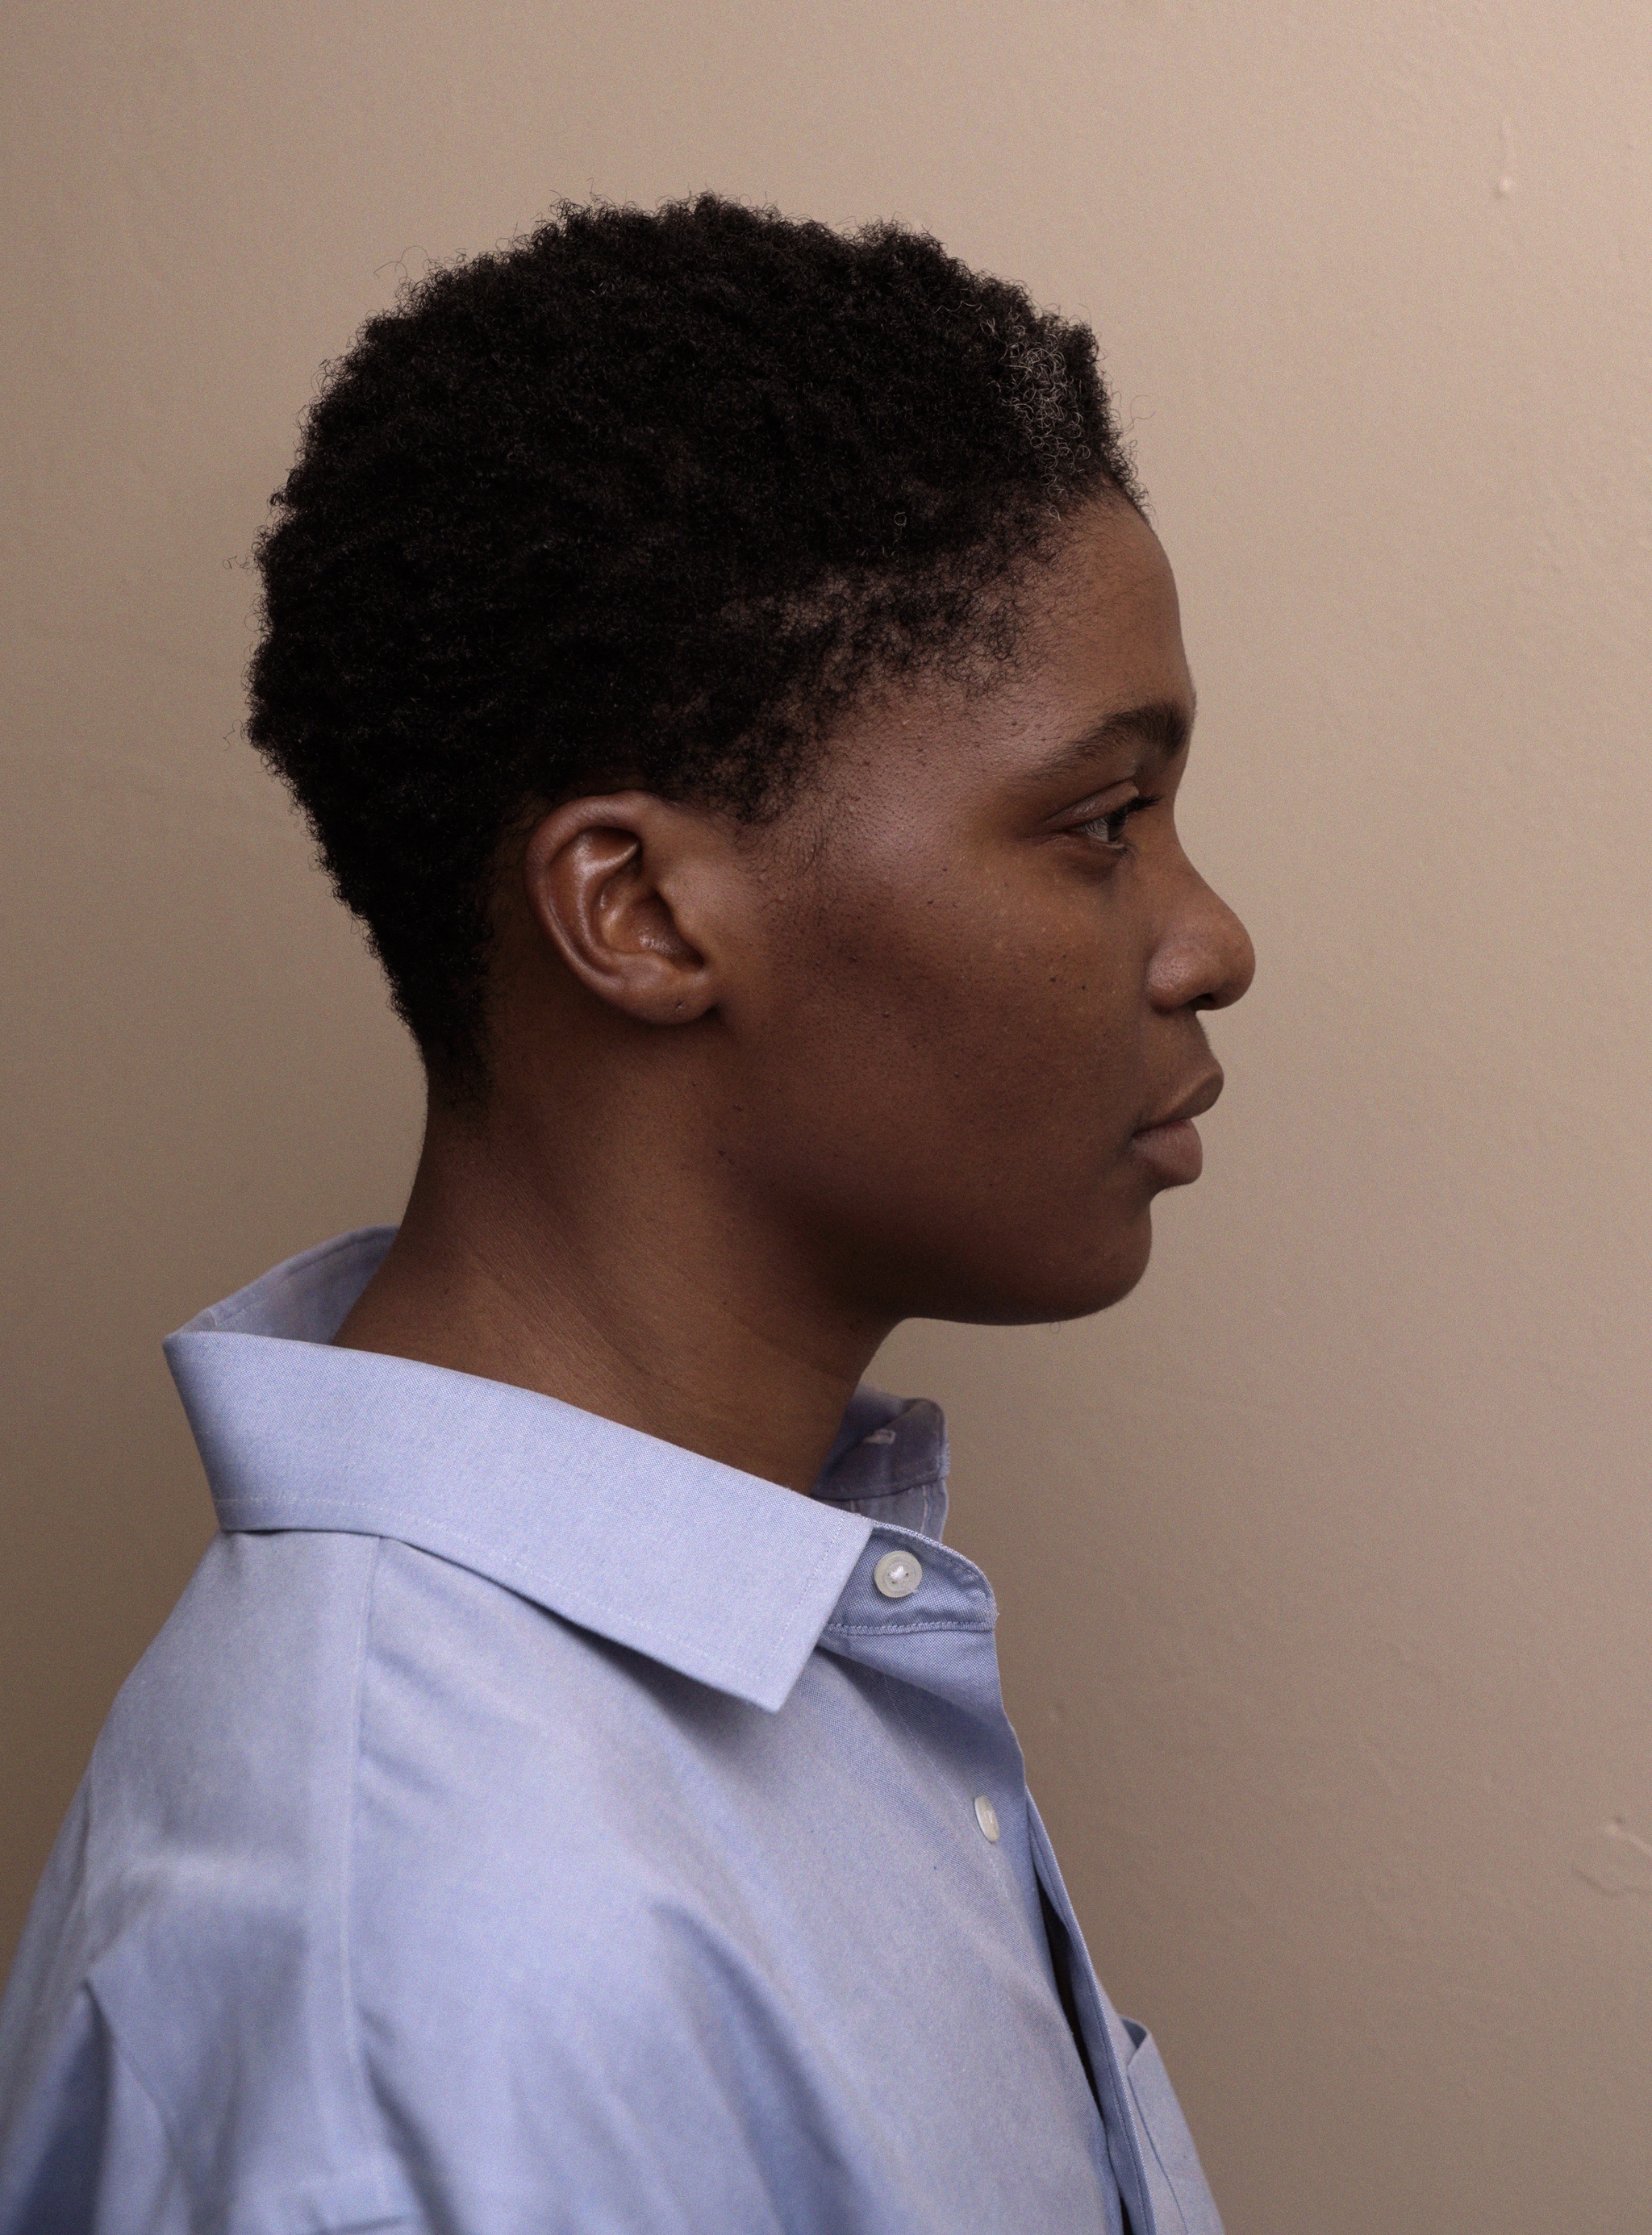 NIC Kay, a gender non-conforming (GNC) individual of Black descent, is prominently featured in this image. Their shortly cropped natural hair frames their face elegantly. NIC Kay’s profile is visible as they face to the left, radiating a quiet strength. They wear an oversized blue shirt that drapes loosely over their frame, standing out against the cream background.